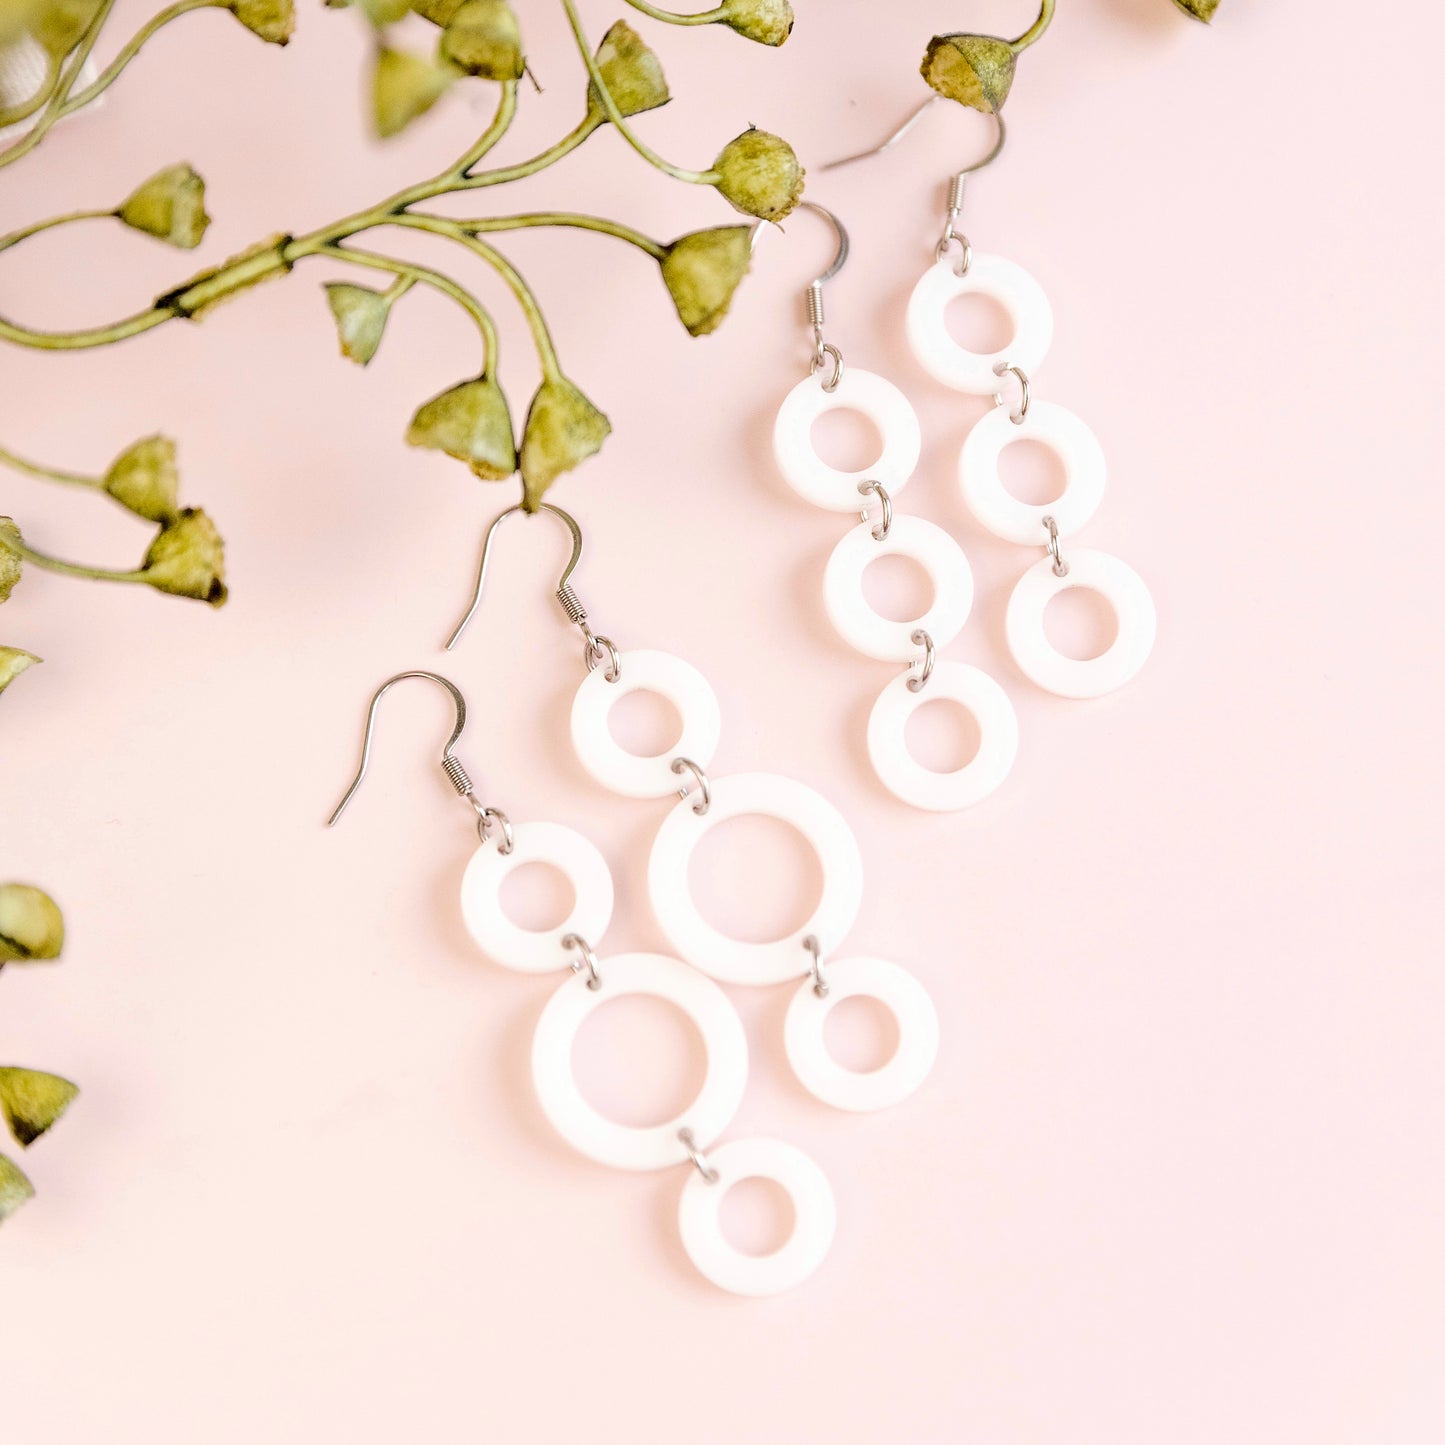 THE CIRCLE TRIO in White Acrylic/ Lightweight Statement Earrings